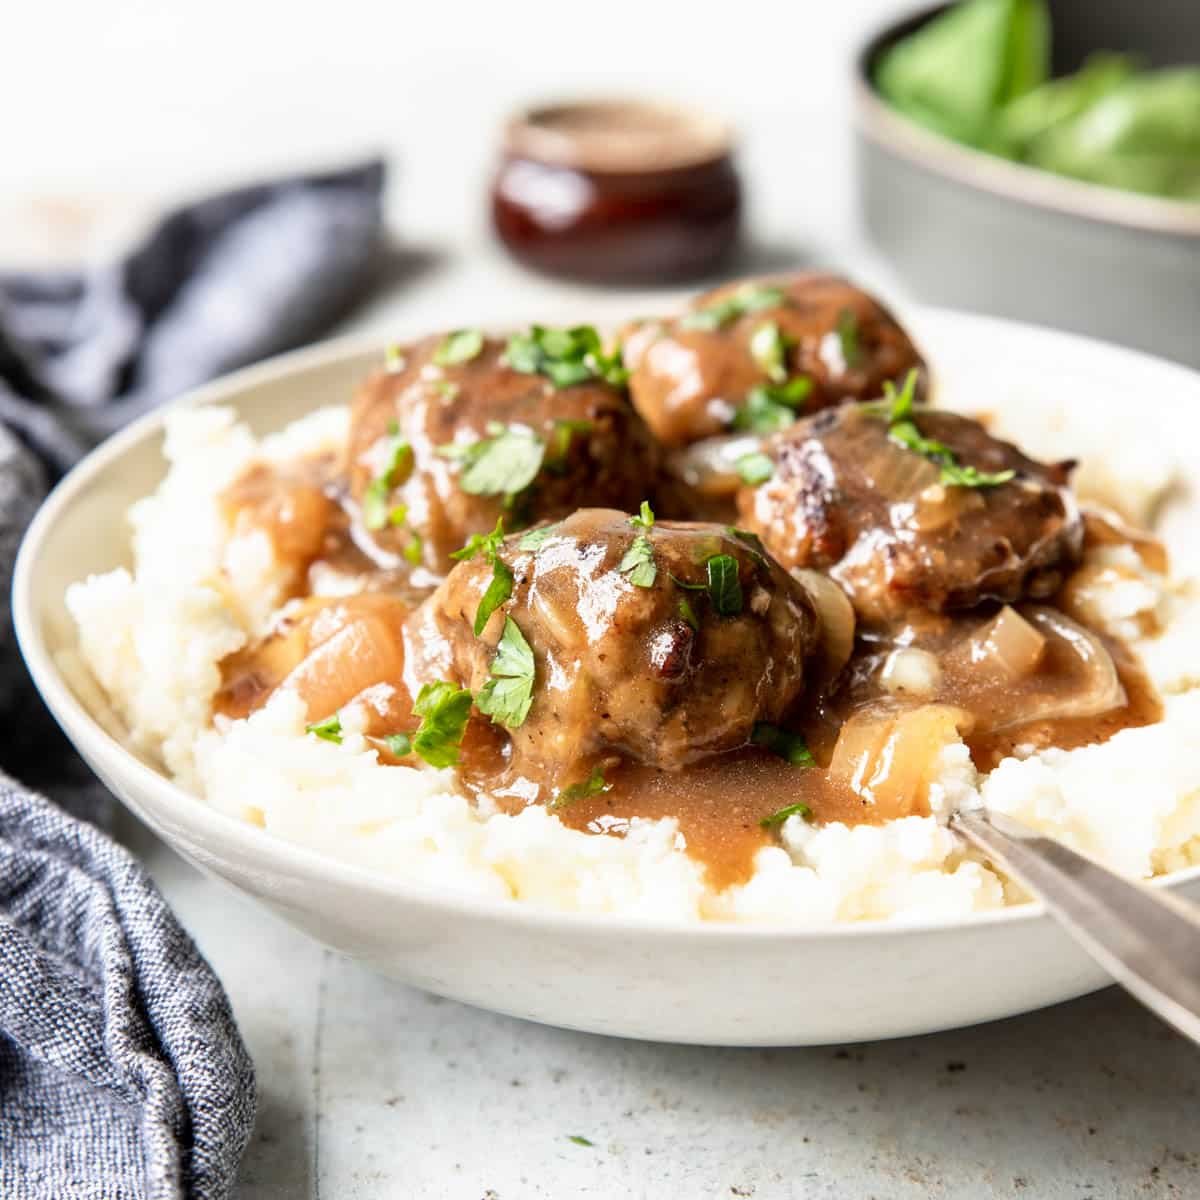 meatballs and gravy served over mashed potatoes and topped with fresh chopped parsley